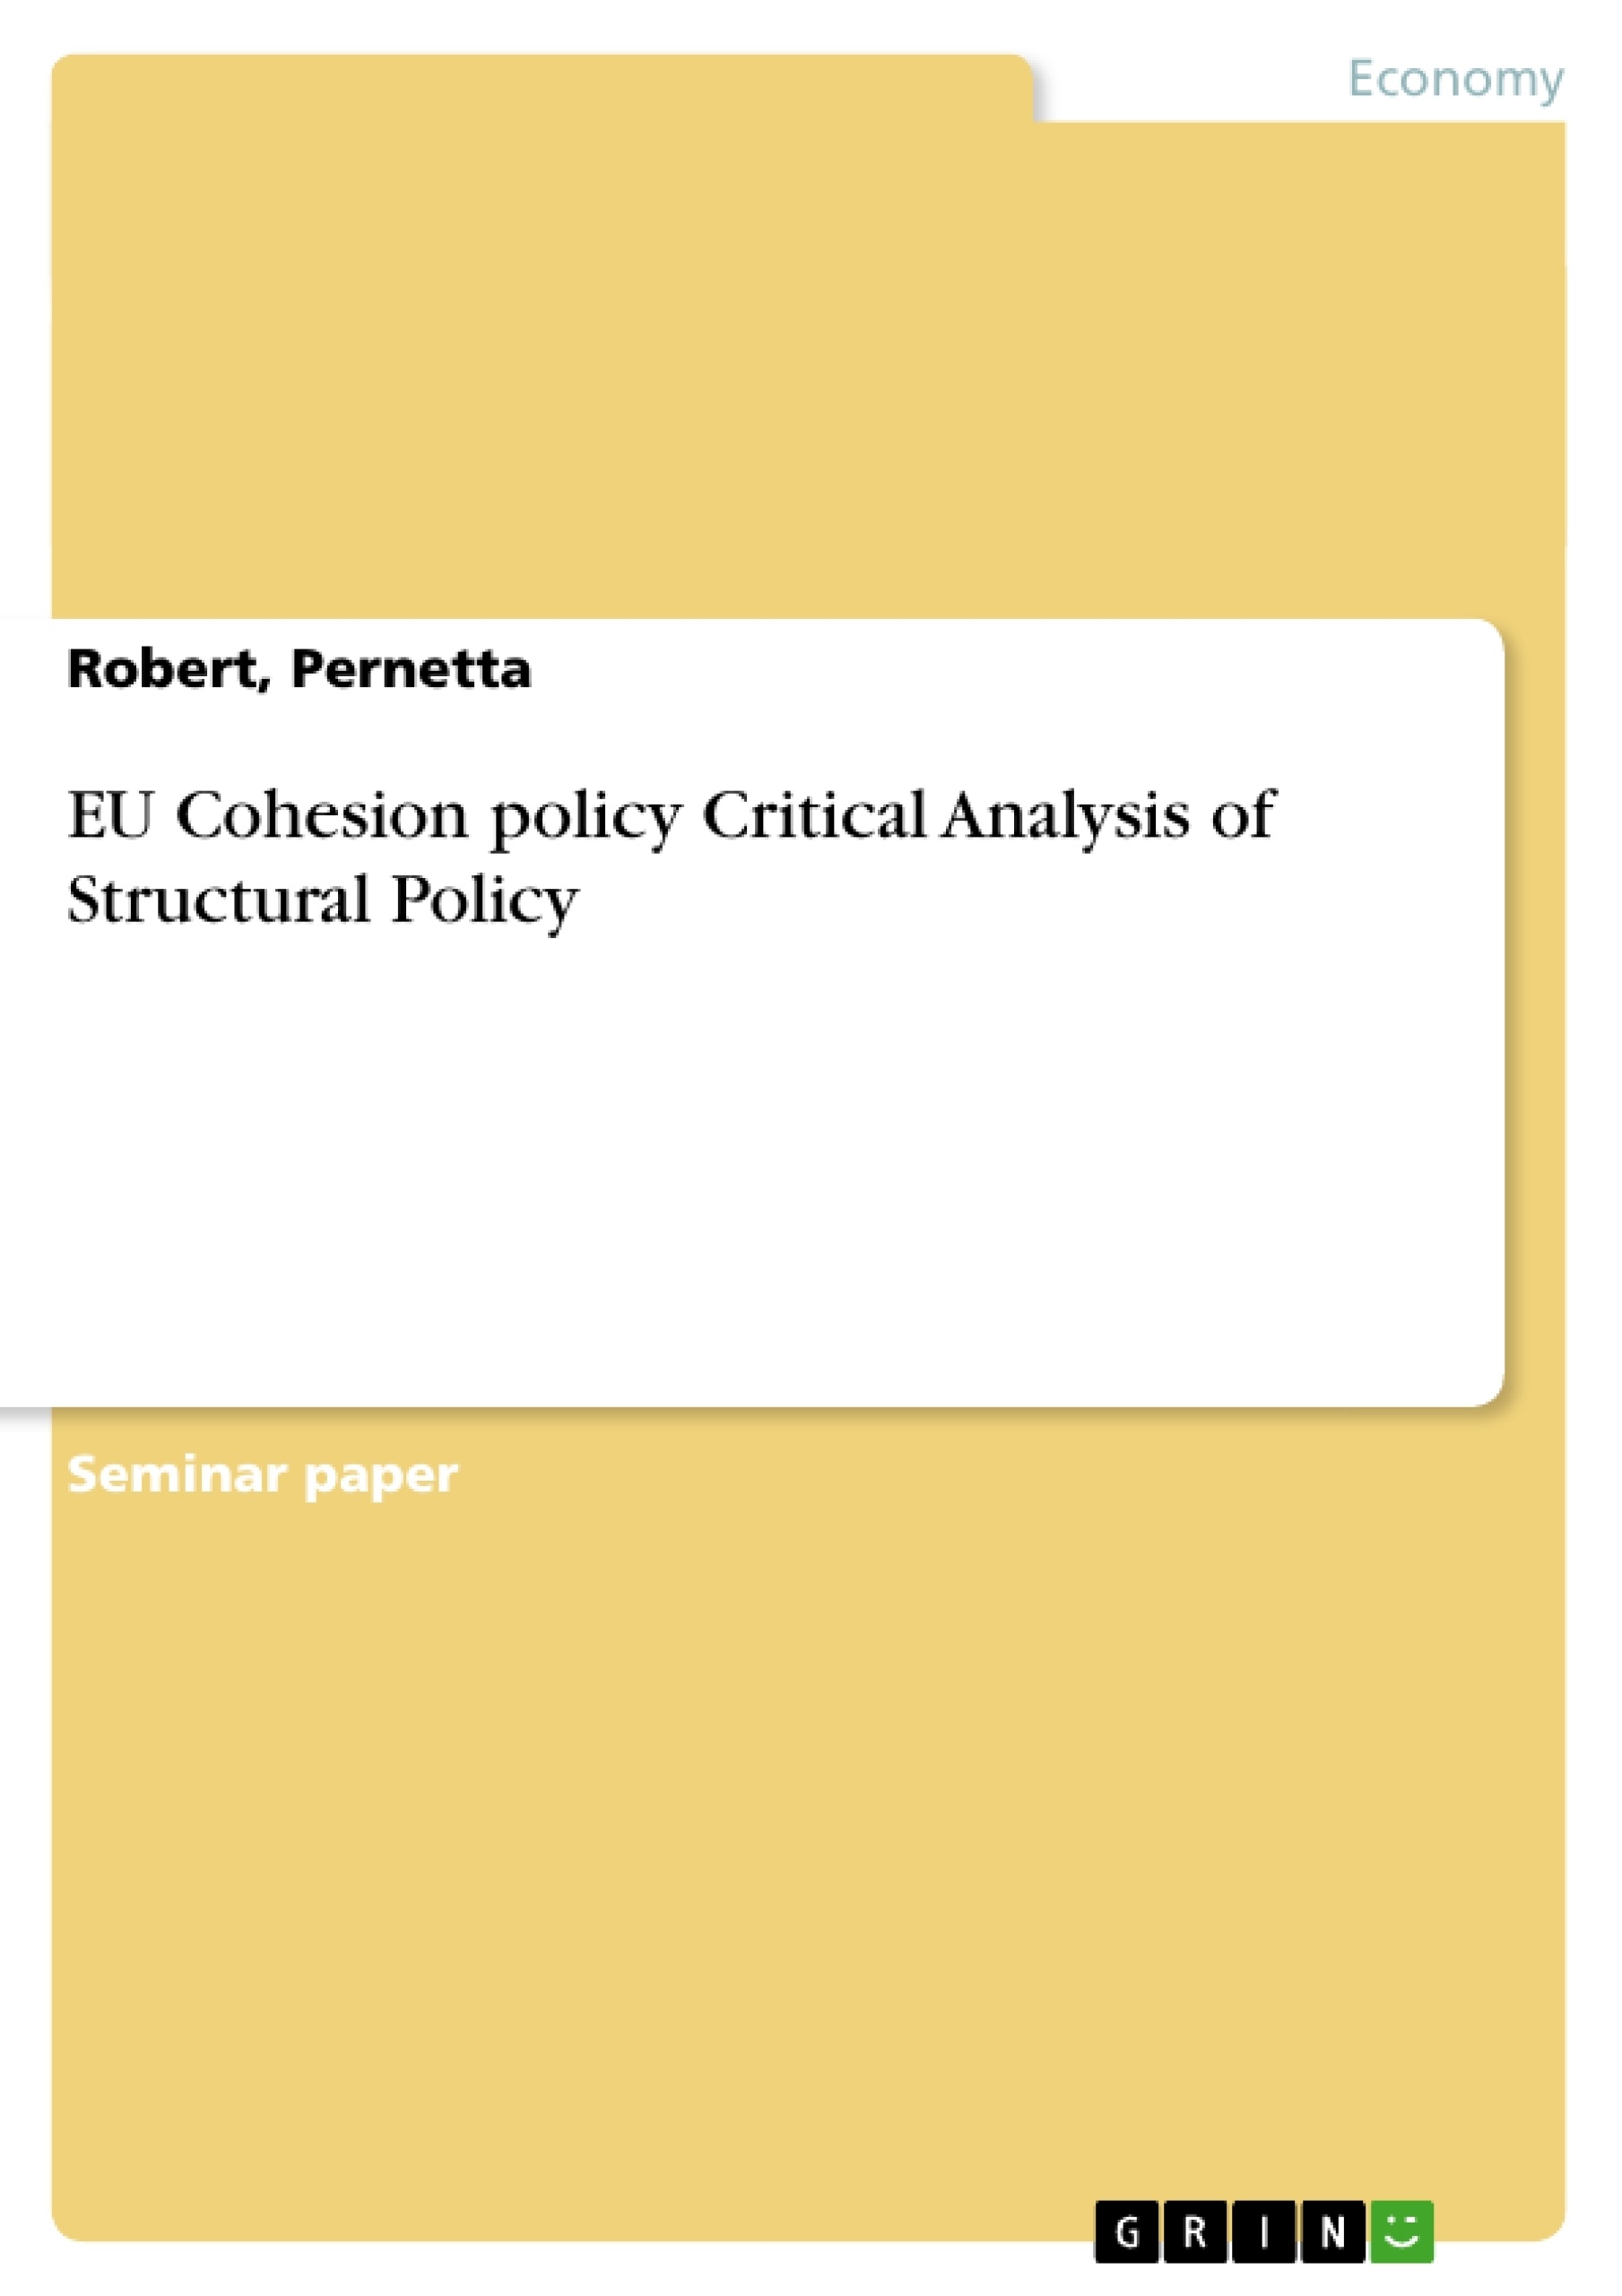 Title: EU Cohesion policy Critical Analysis of Structural Policy